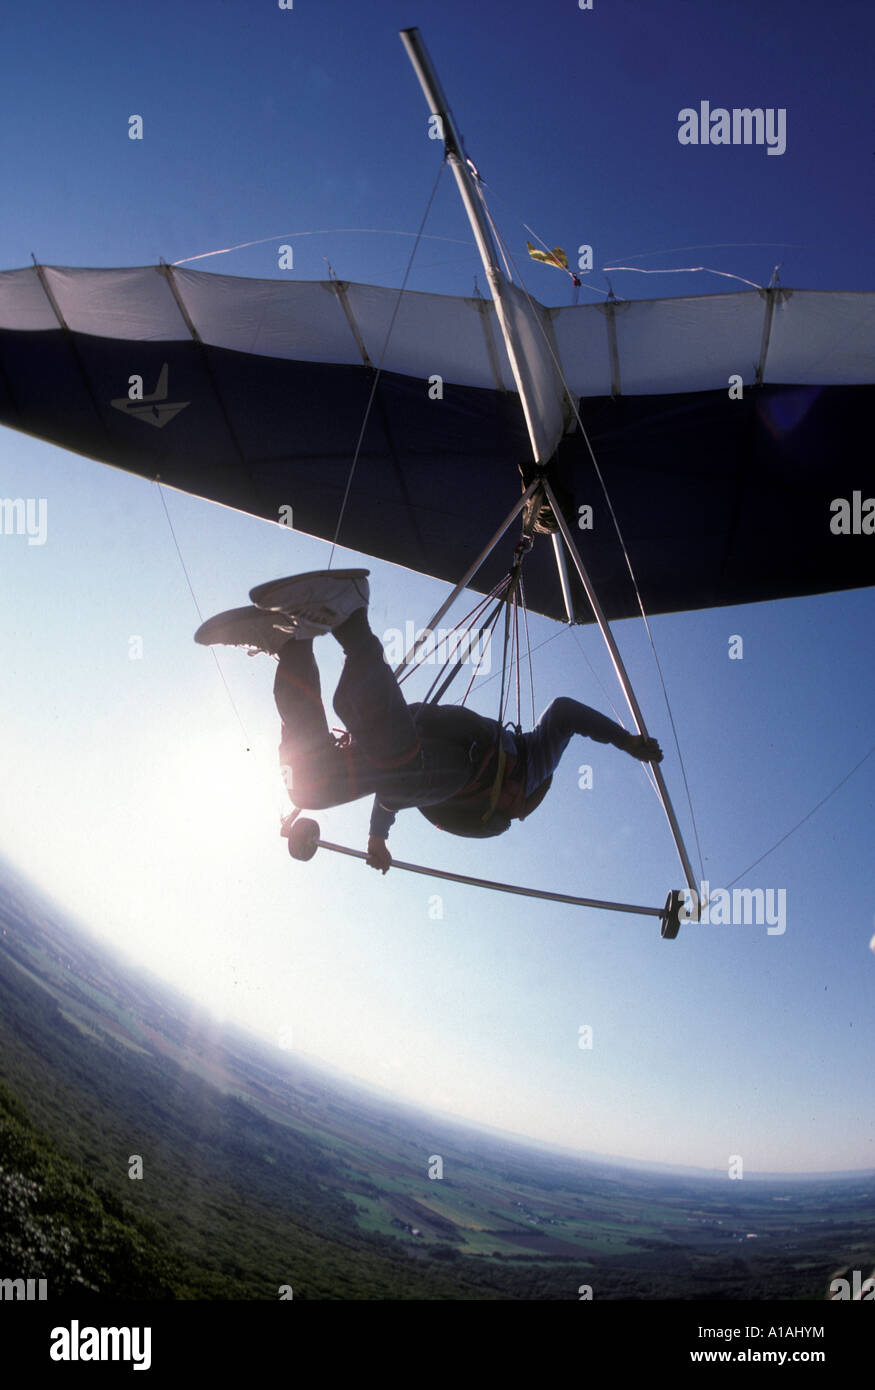 USA Maryland Thurmont Hang glider pilots launches from platform over Appalachian mountains Stock Photo